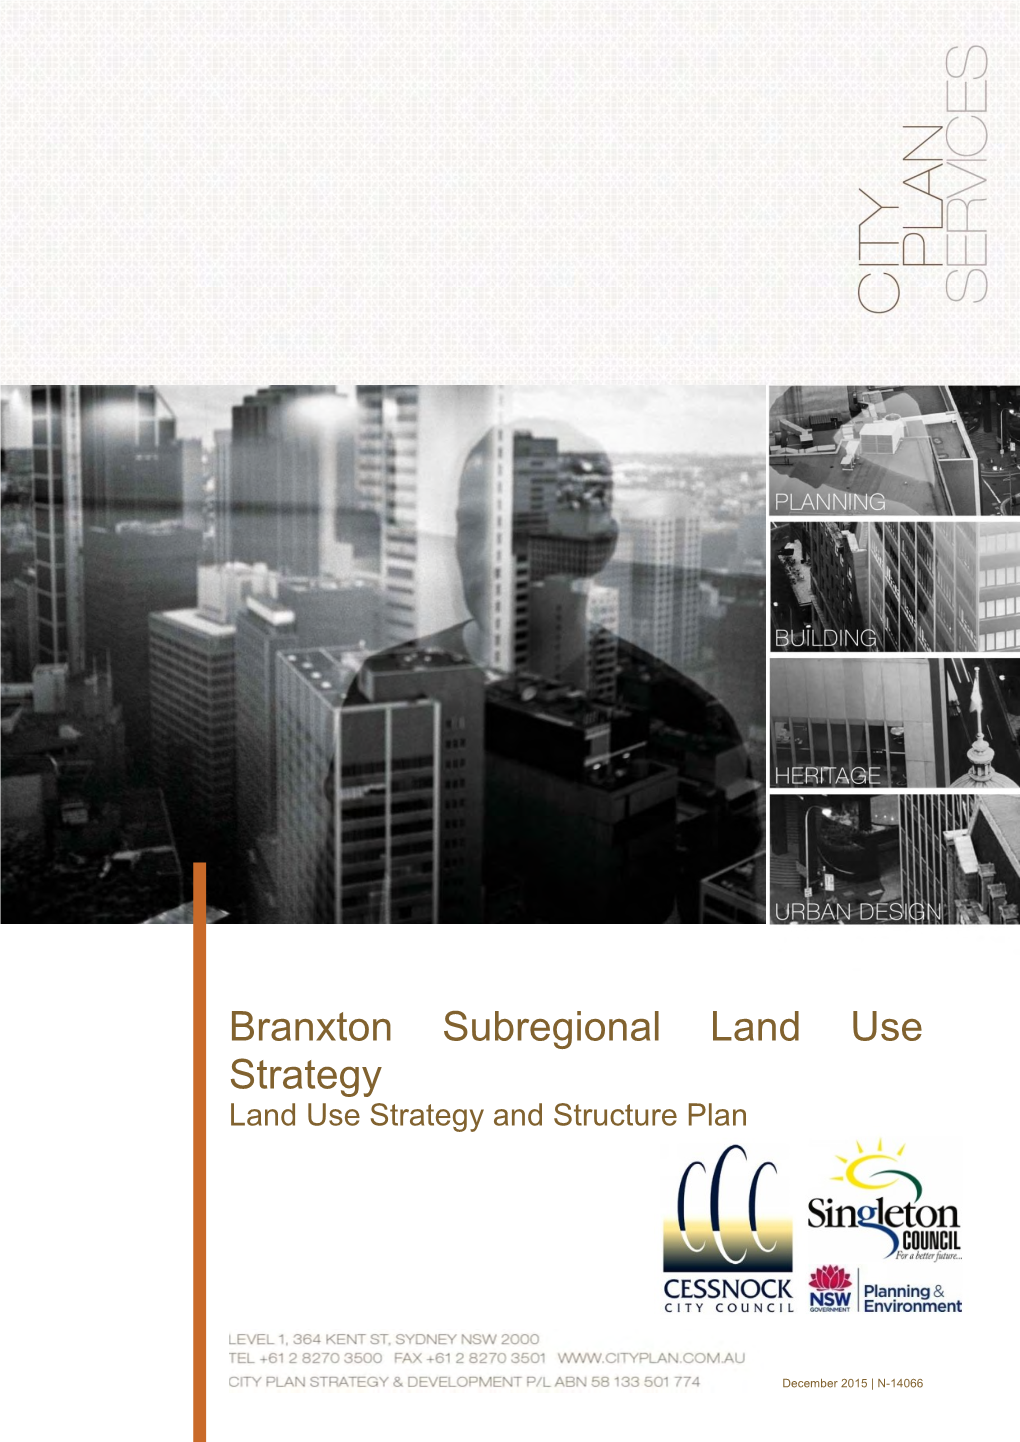 Branxton Subregional Land Use Strategy Land Use Strategy and Structure Plan